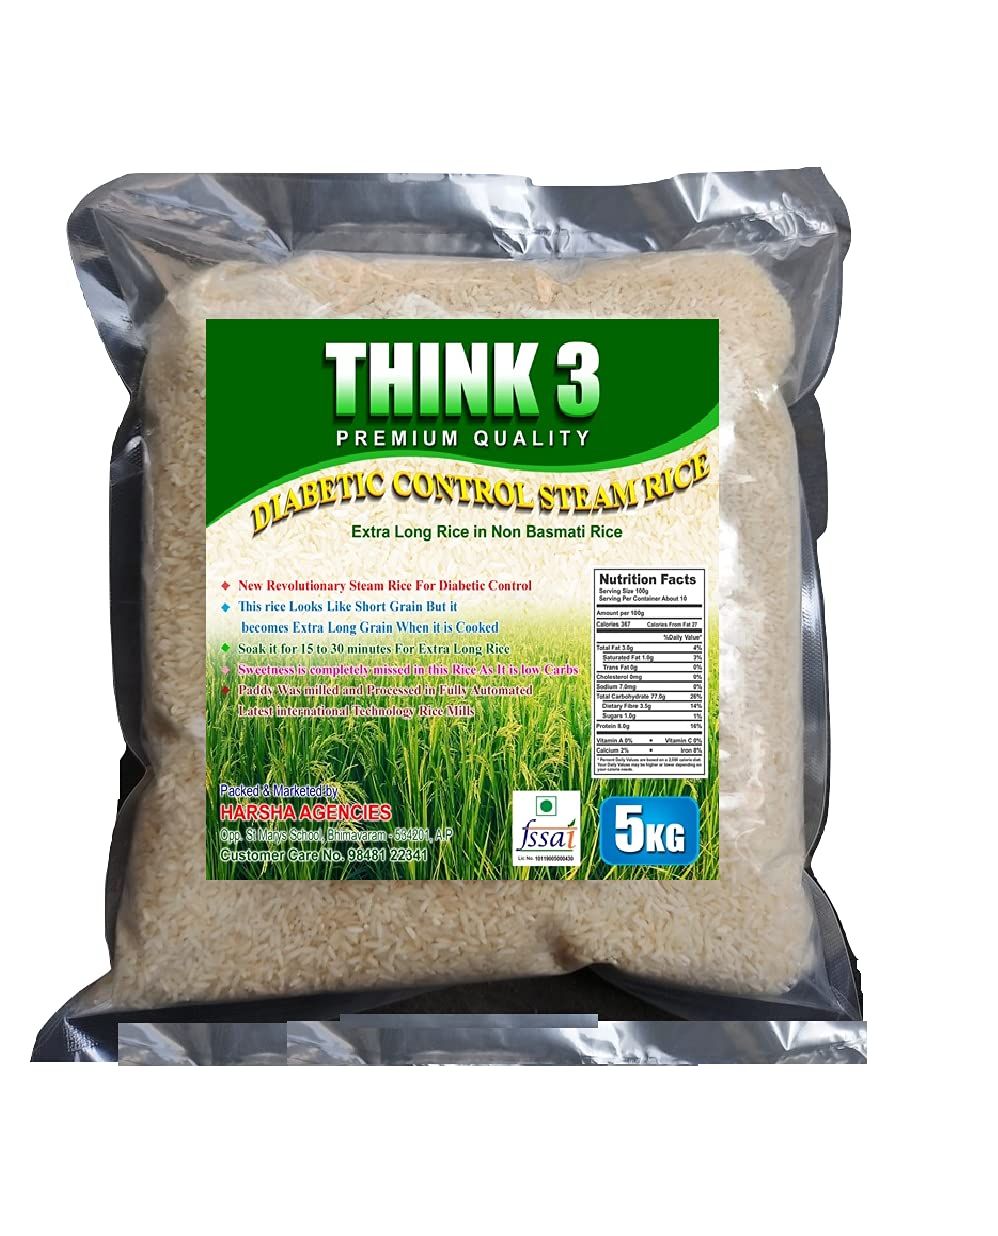 THINK3 Diabetic Control Steam Rice Image